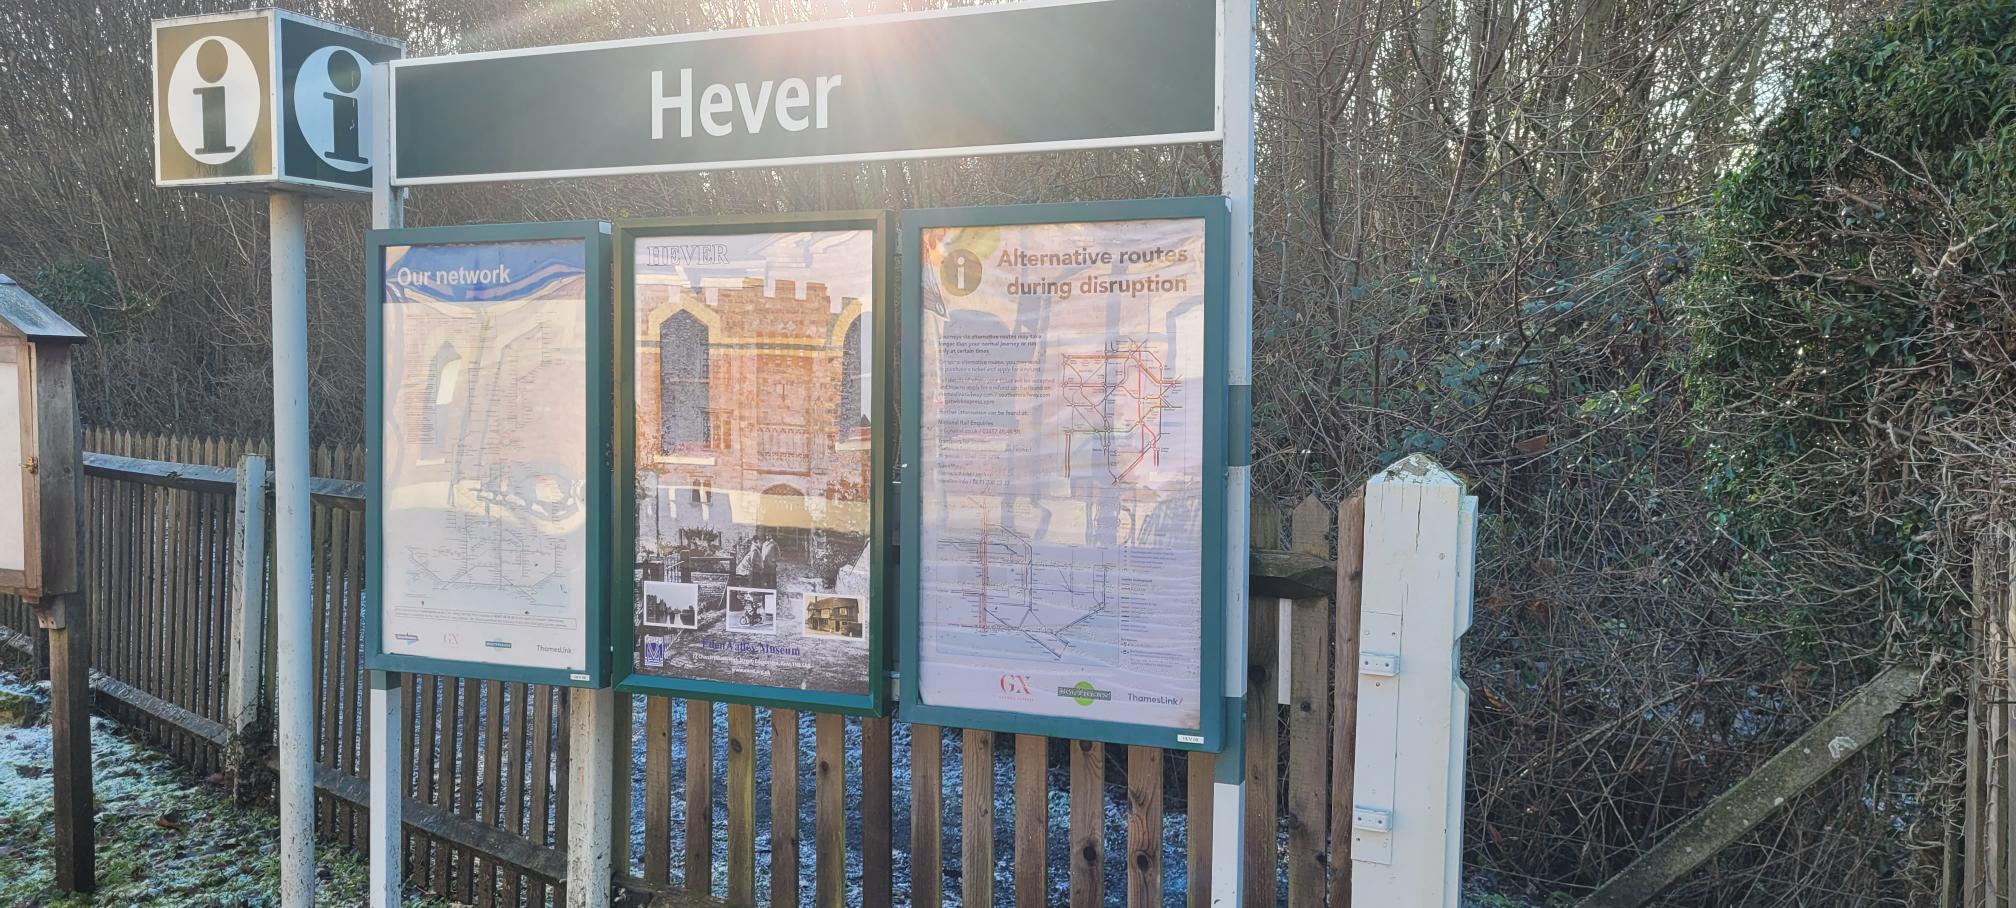 Eden Valley Museum artwork on display at Hever station